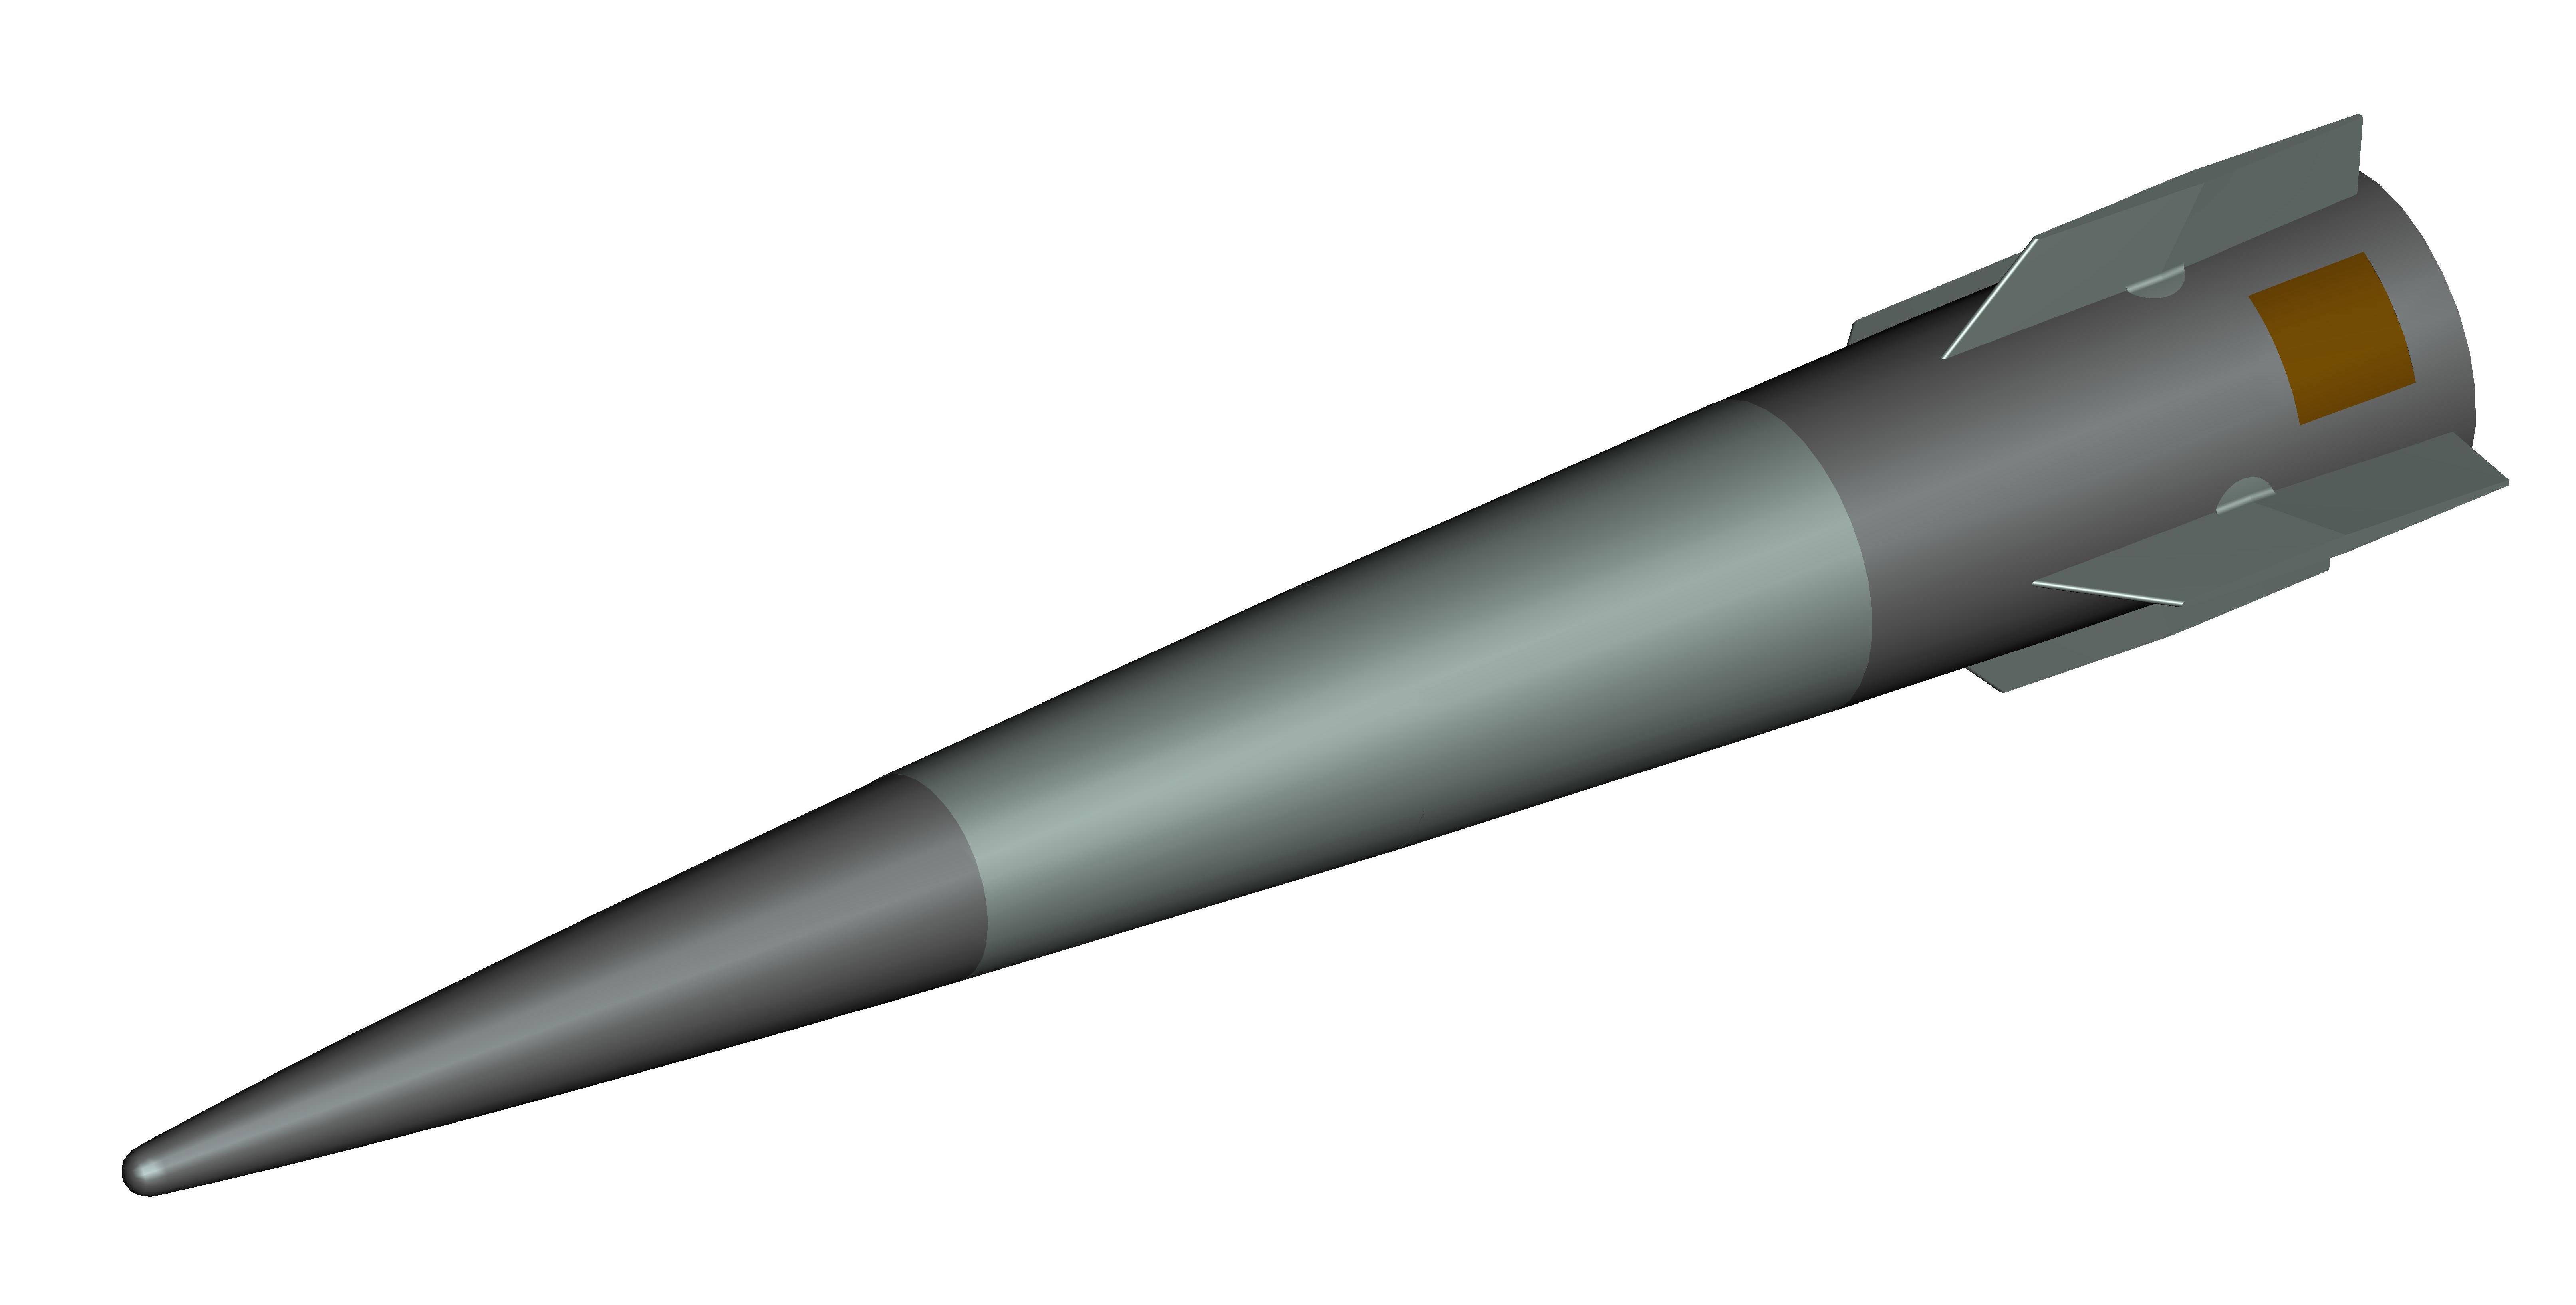 An artist's conception of BAE Systems' Hyper Velocity Projectile. BAE Systems Image